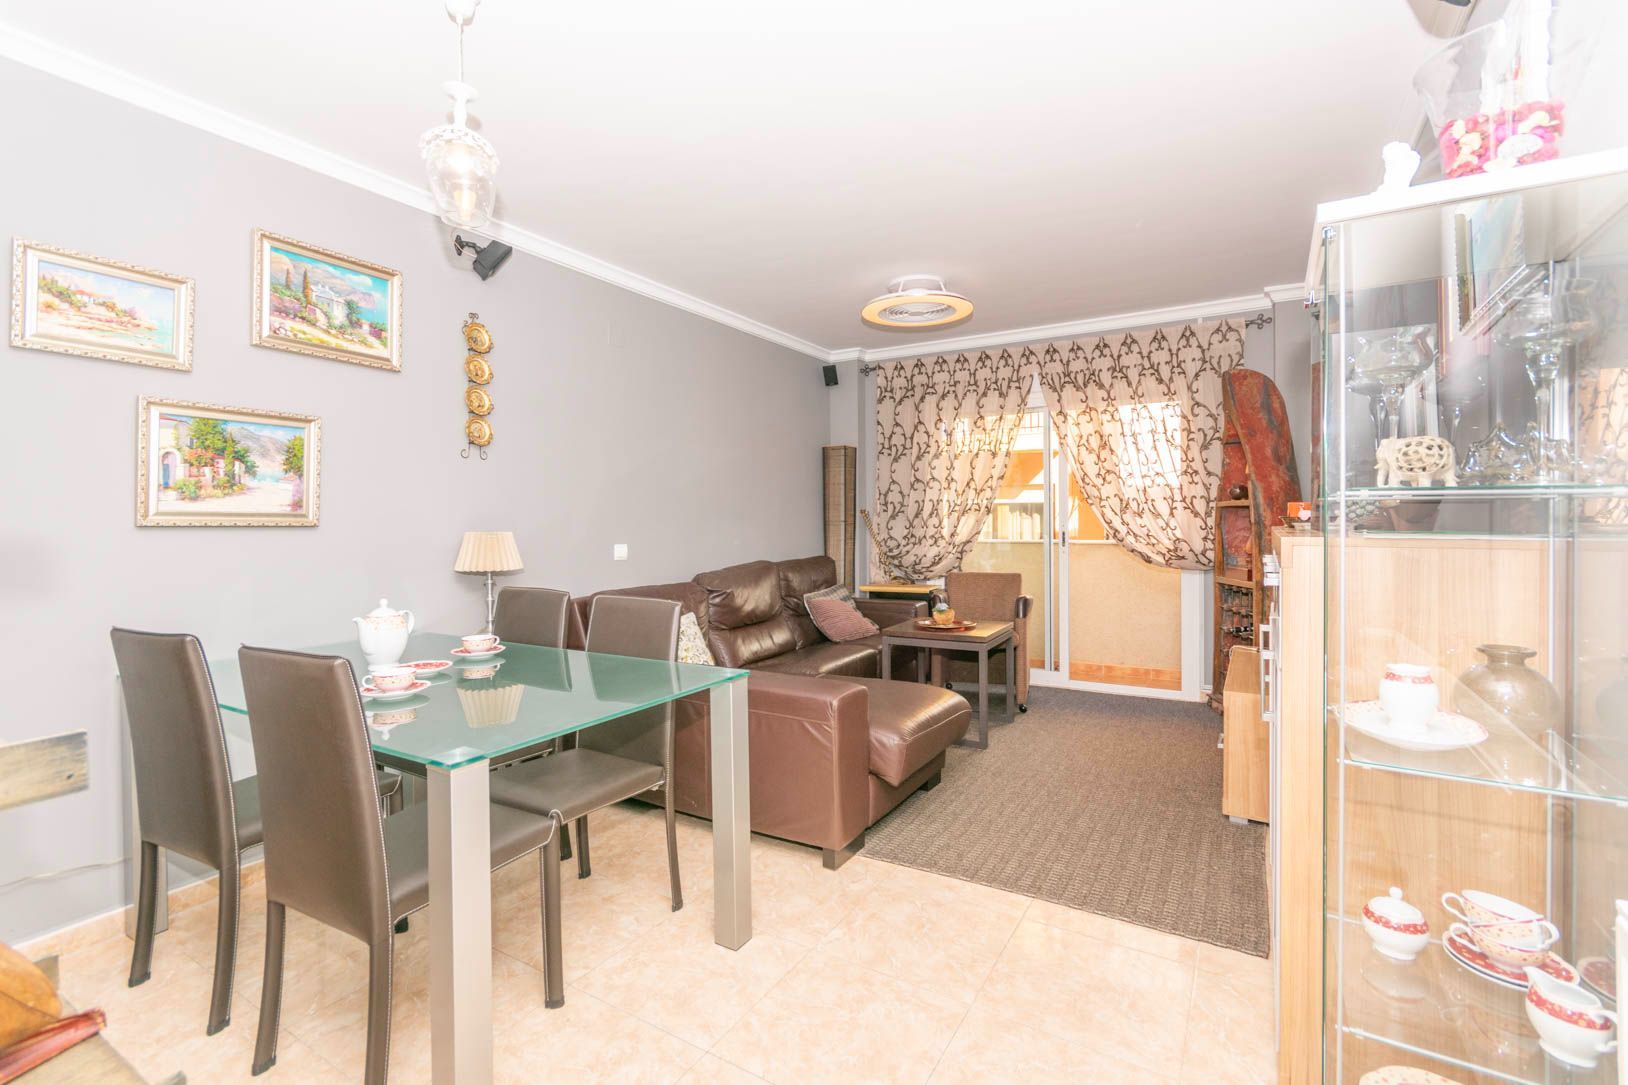 Flat in the central part of the town of Calpe, about 900 m to the Arenal beach.